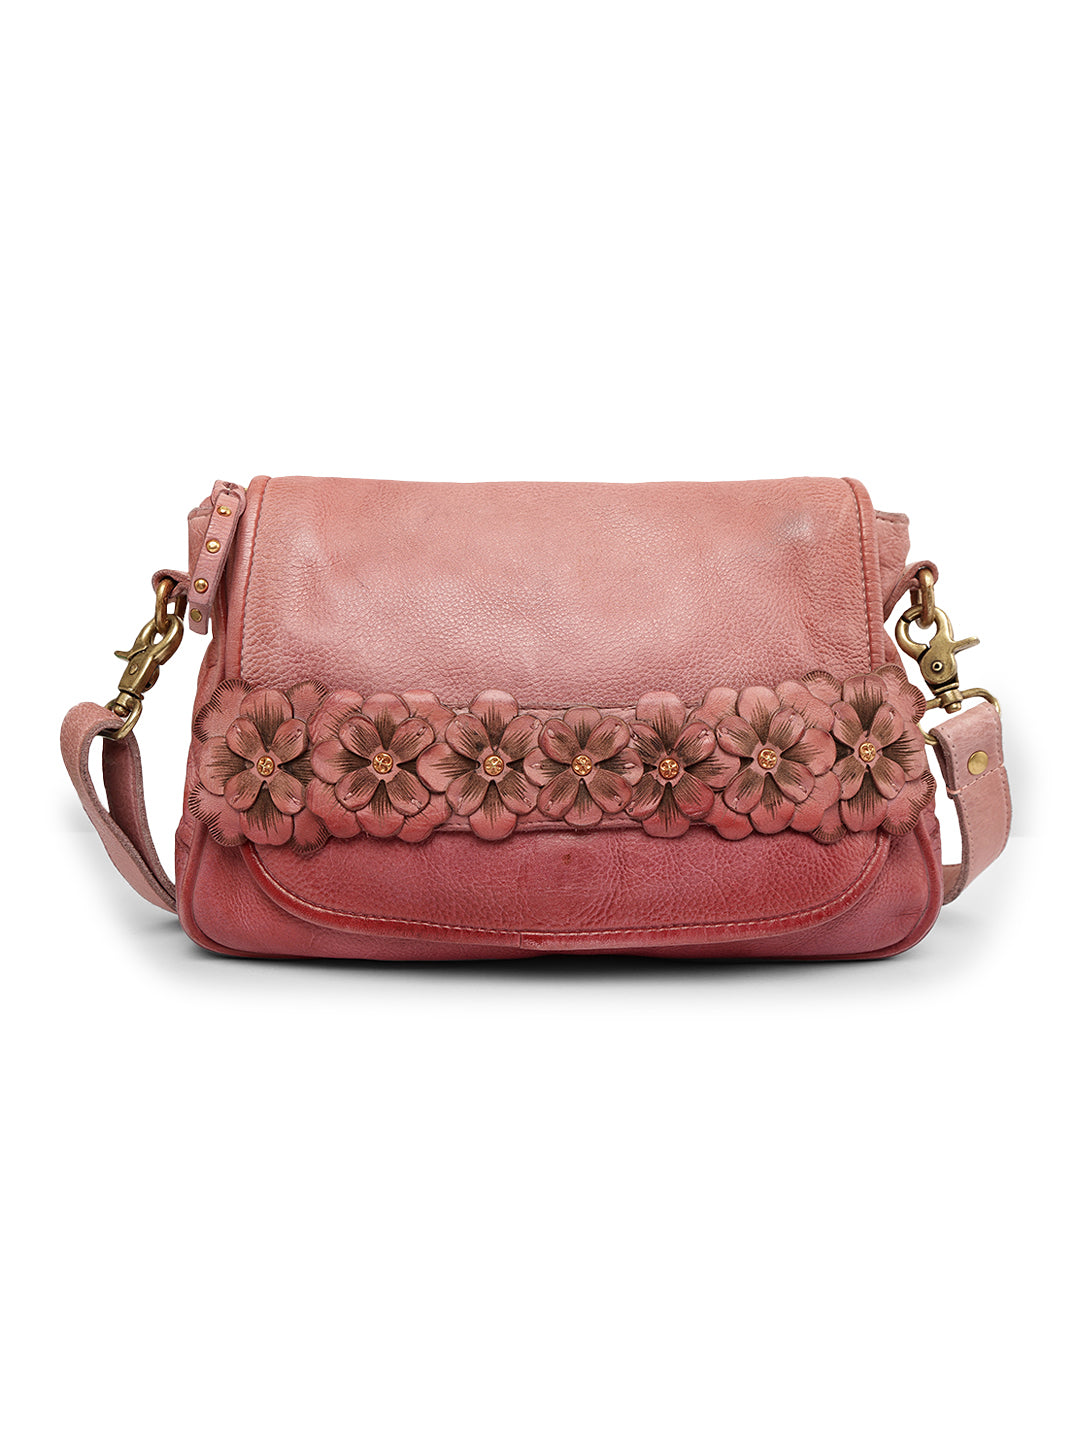 Discover Roseate: Luxurious Leather Crossbody for Effortless Elegance